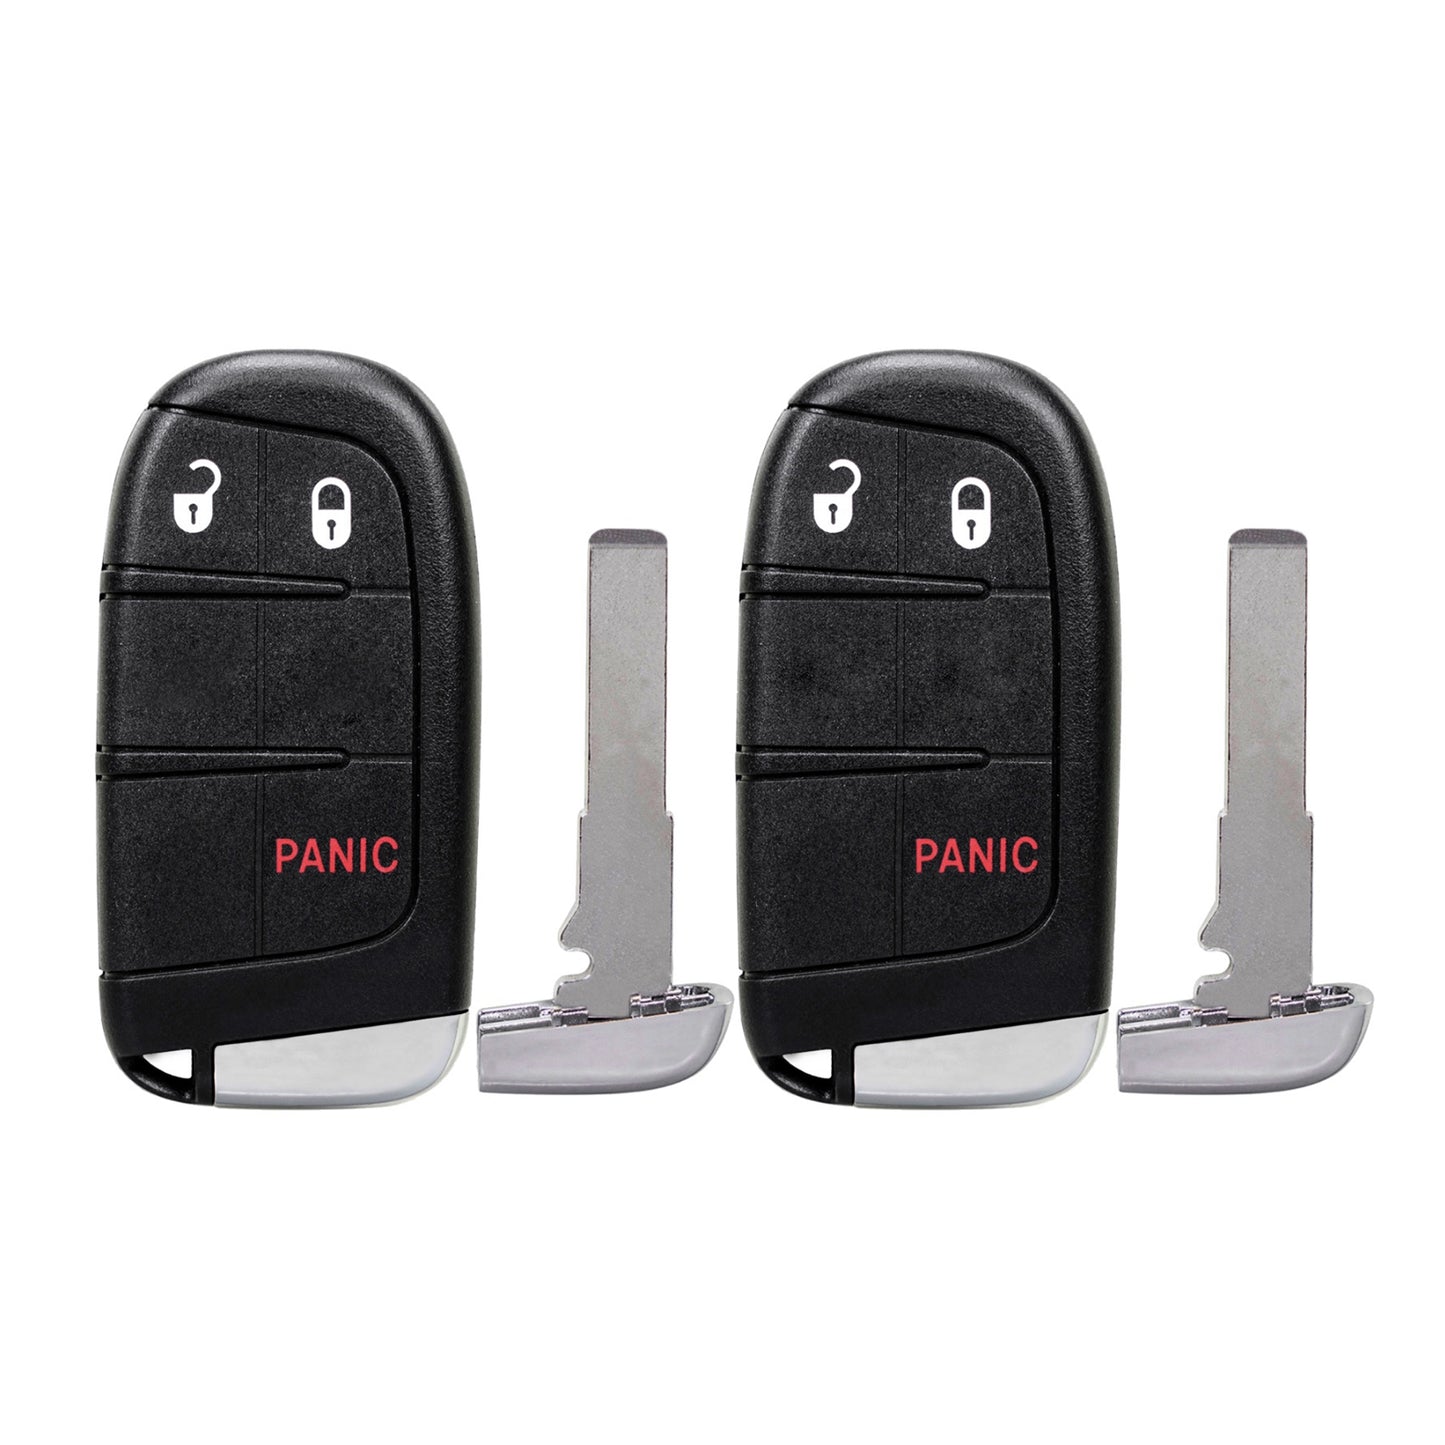 3 Buttons 433MHz Keyless Entry Fob Remote Car Key For 2017-2021 JEEP COMPASS FCC ID: M3N-40821302 SKU : J744